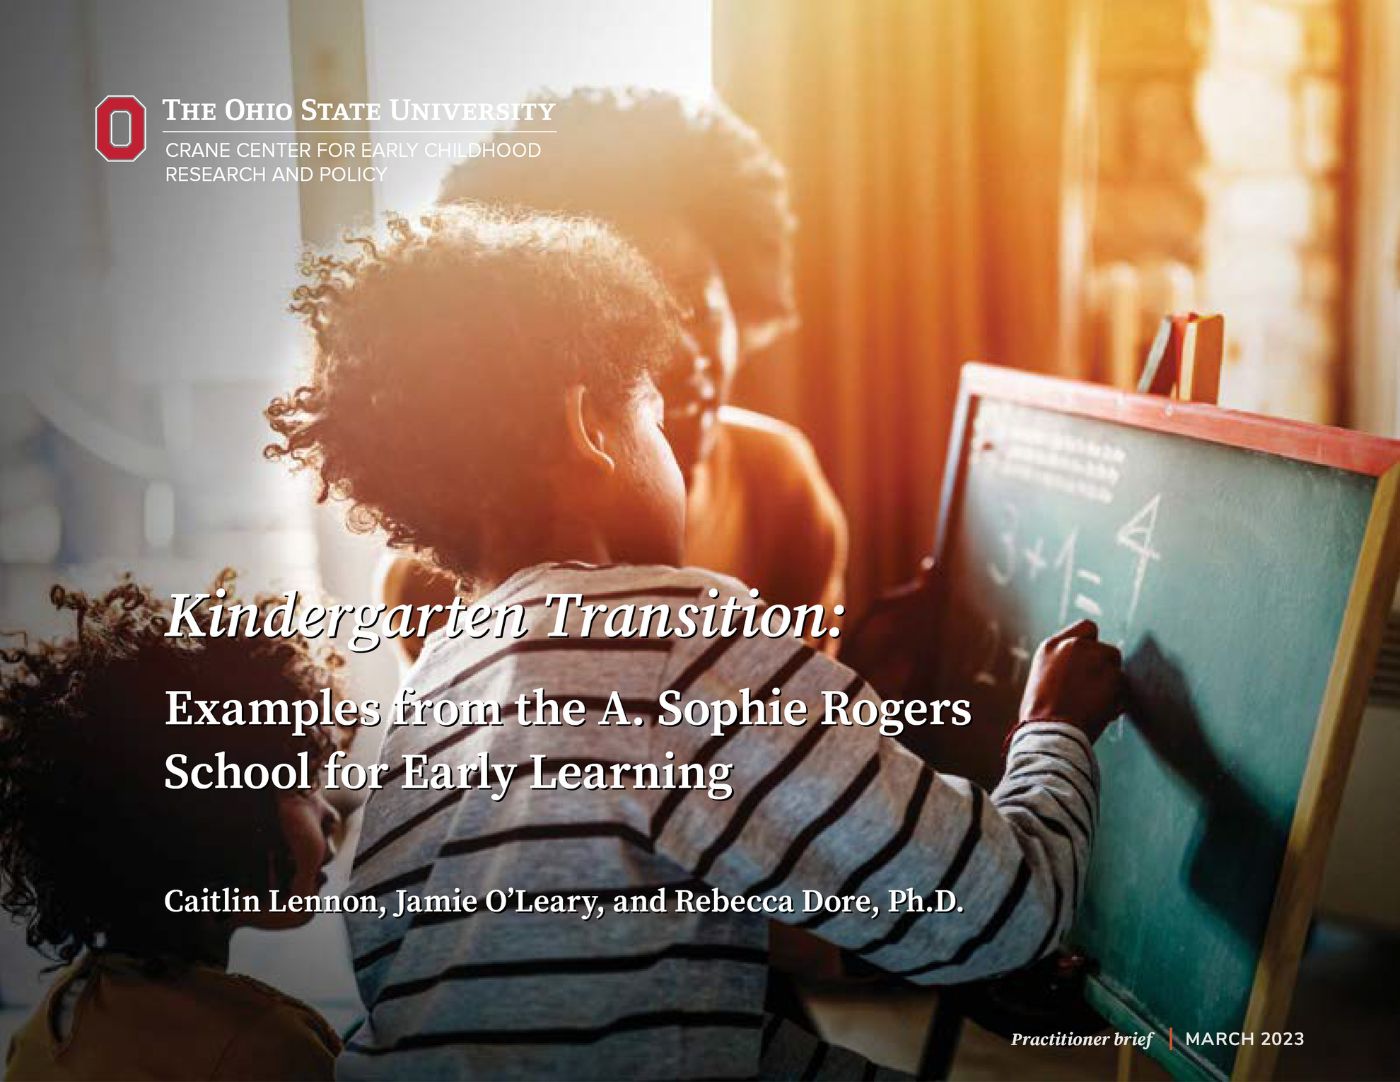 The cover of the brief. Image of two children doing math on a chalk board with an adult present. Title: Kindergarten Transition: Examples from the A. Sophie Rogers School for Early Learning.